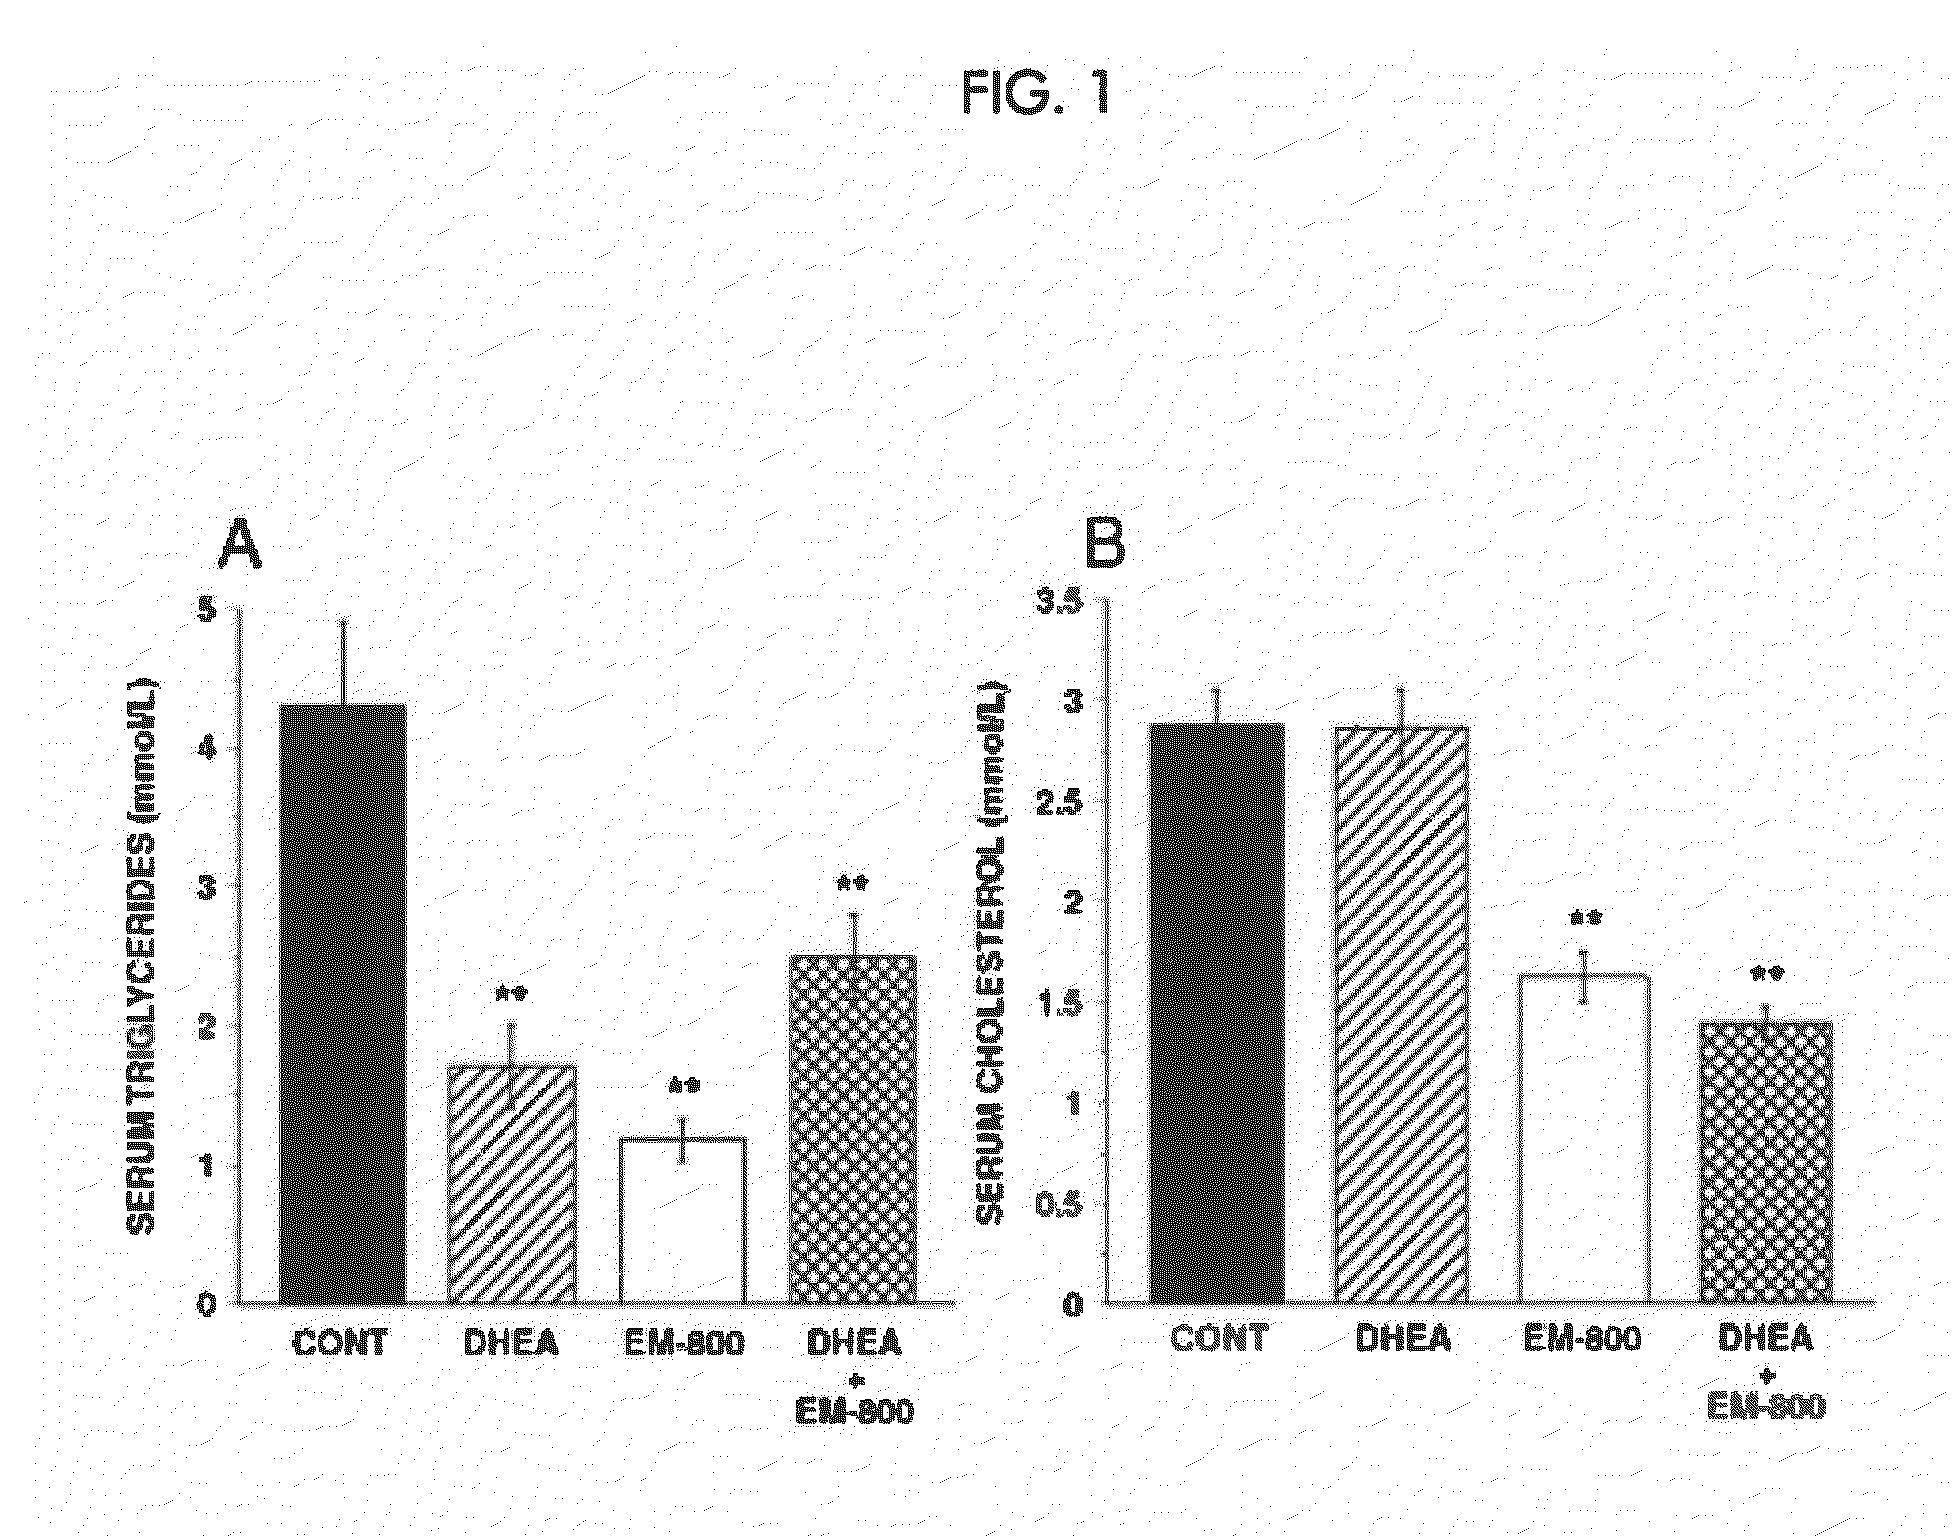 Treatment of hot flushes, vasomotor symptoms, and night sweats with sex steroid precursors in combination with selective estrogen receptor modulators